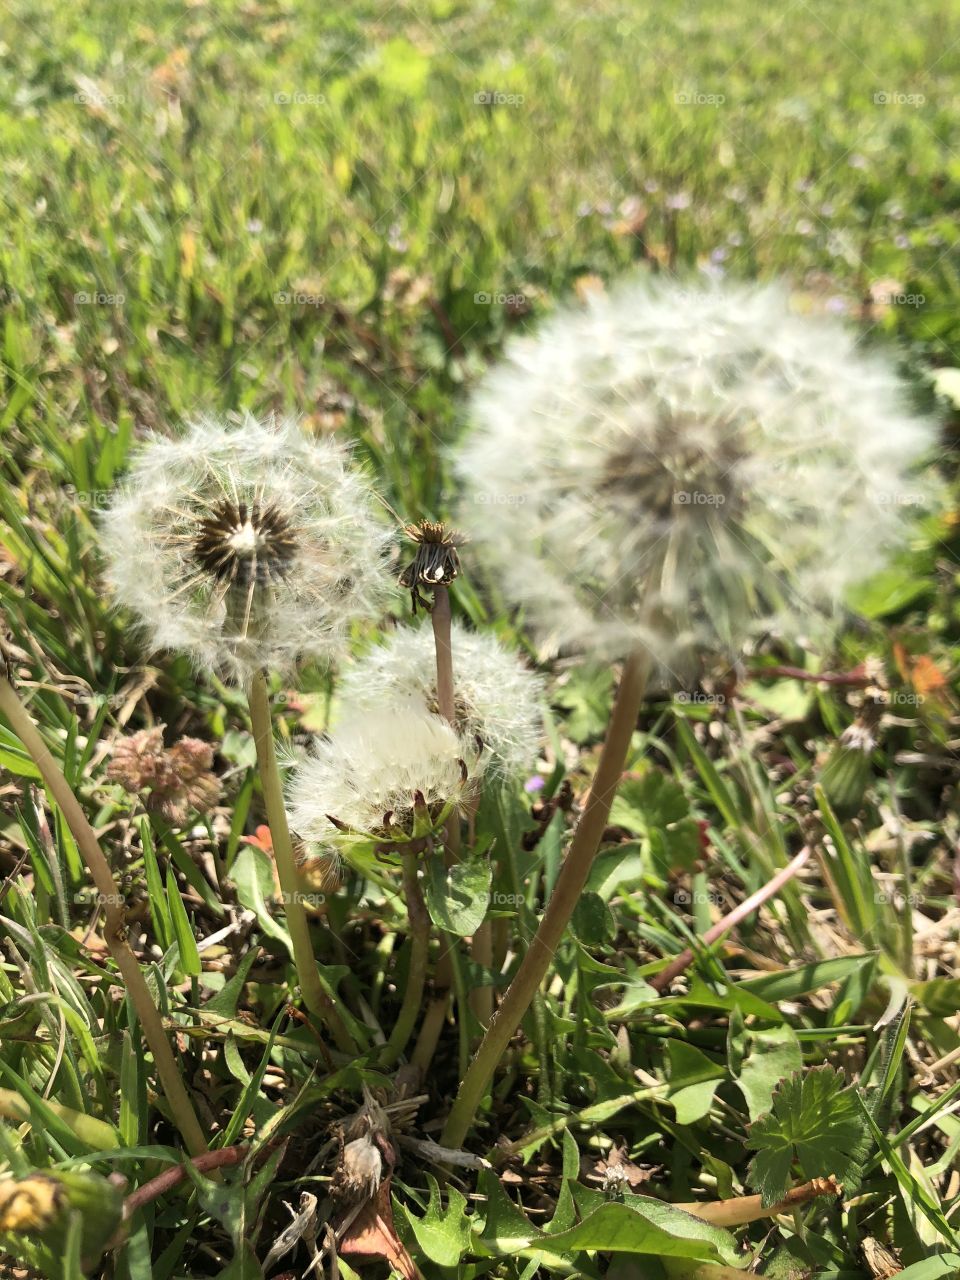 Dandelion patch stands firm in Oklahoma spring